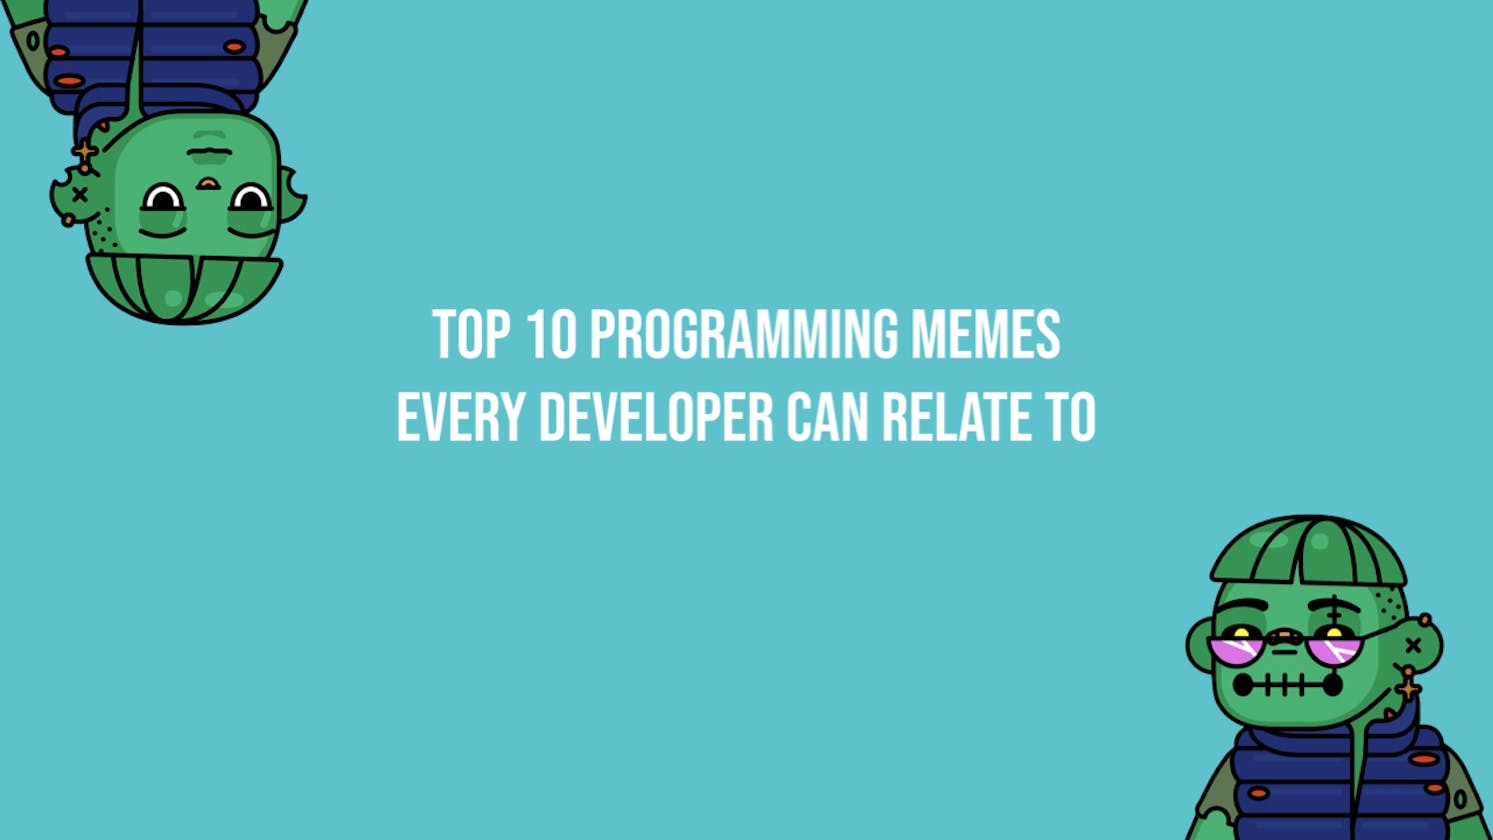 Top 10 Programming Memes Every Developer Can Relate To